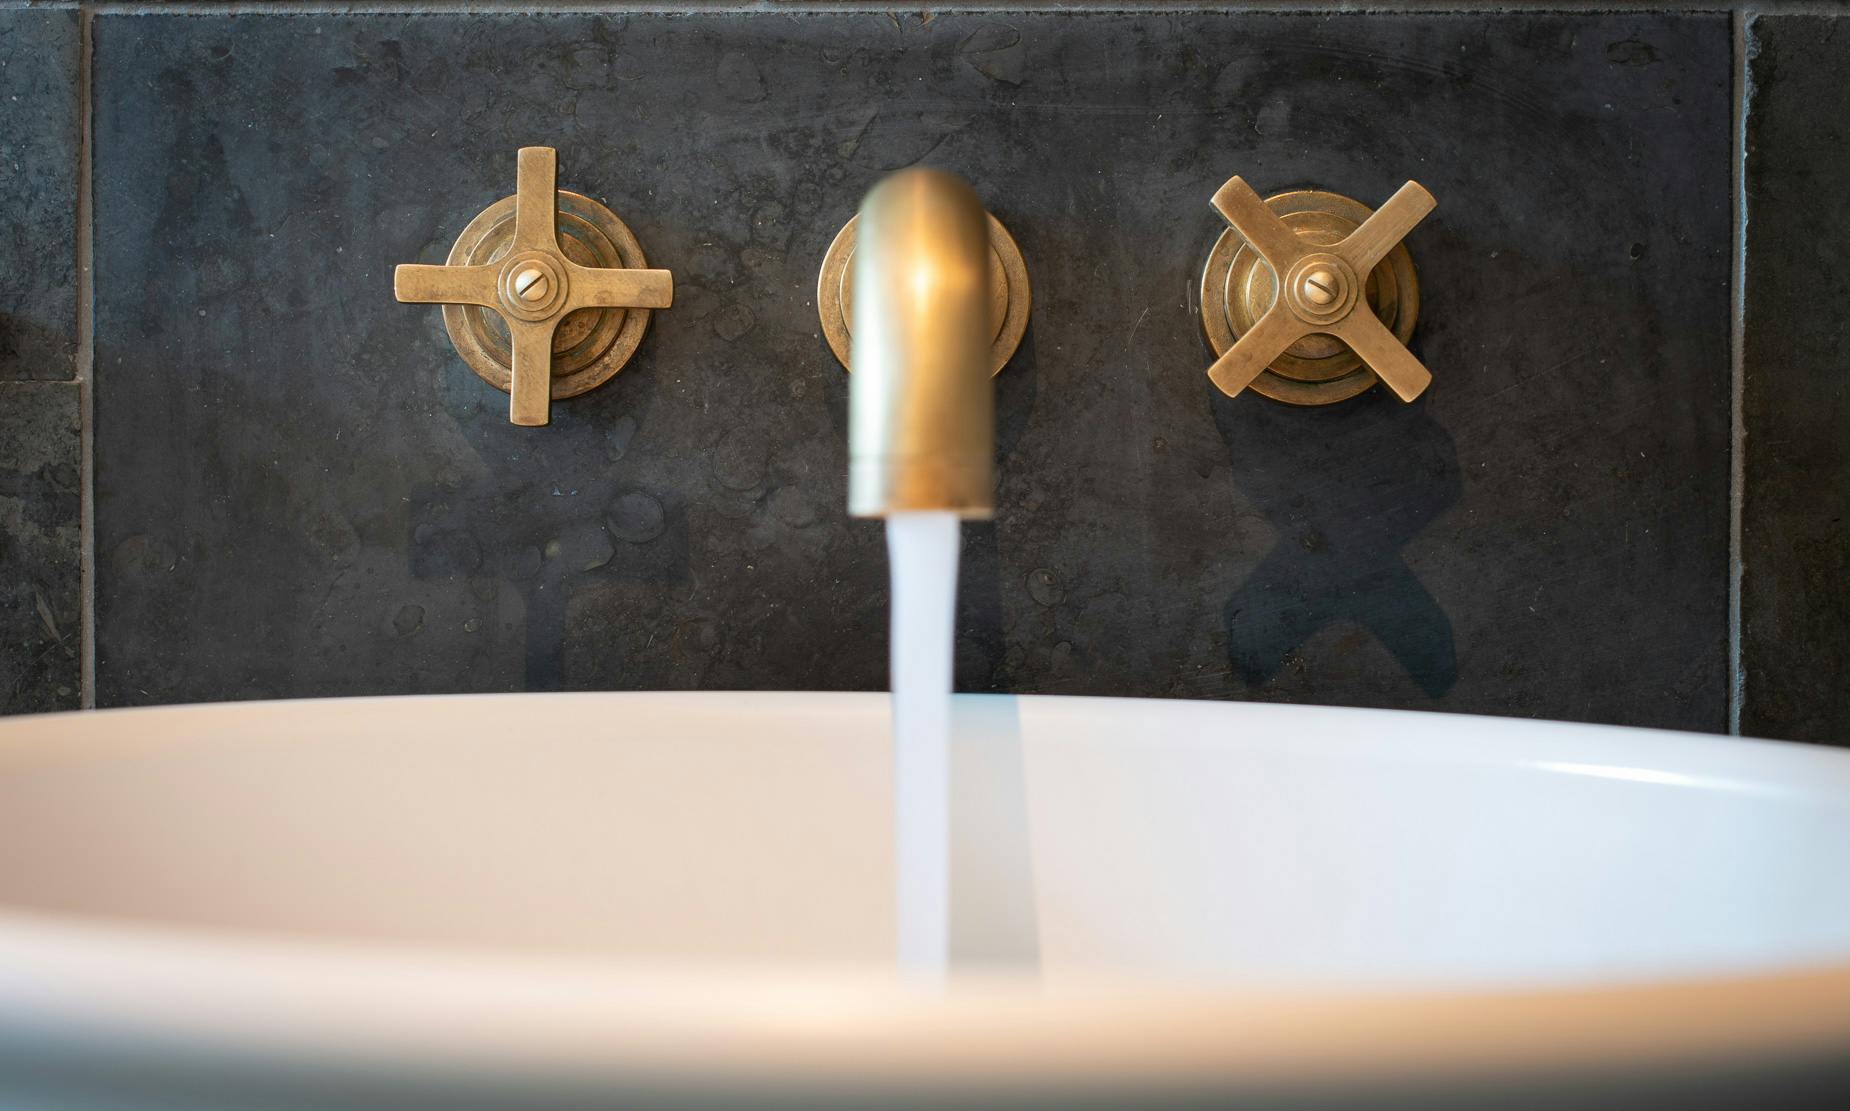 Brass Bathroom Accessories & Fittings - Brushed & Natural Finishes